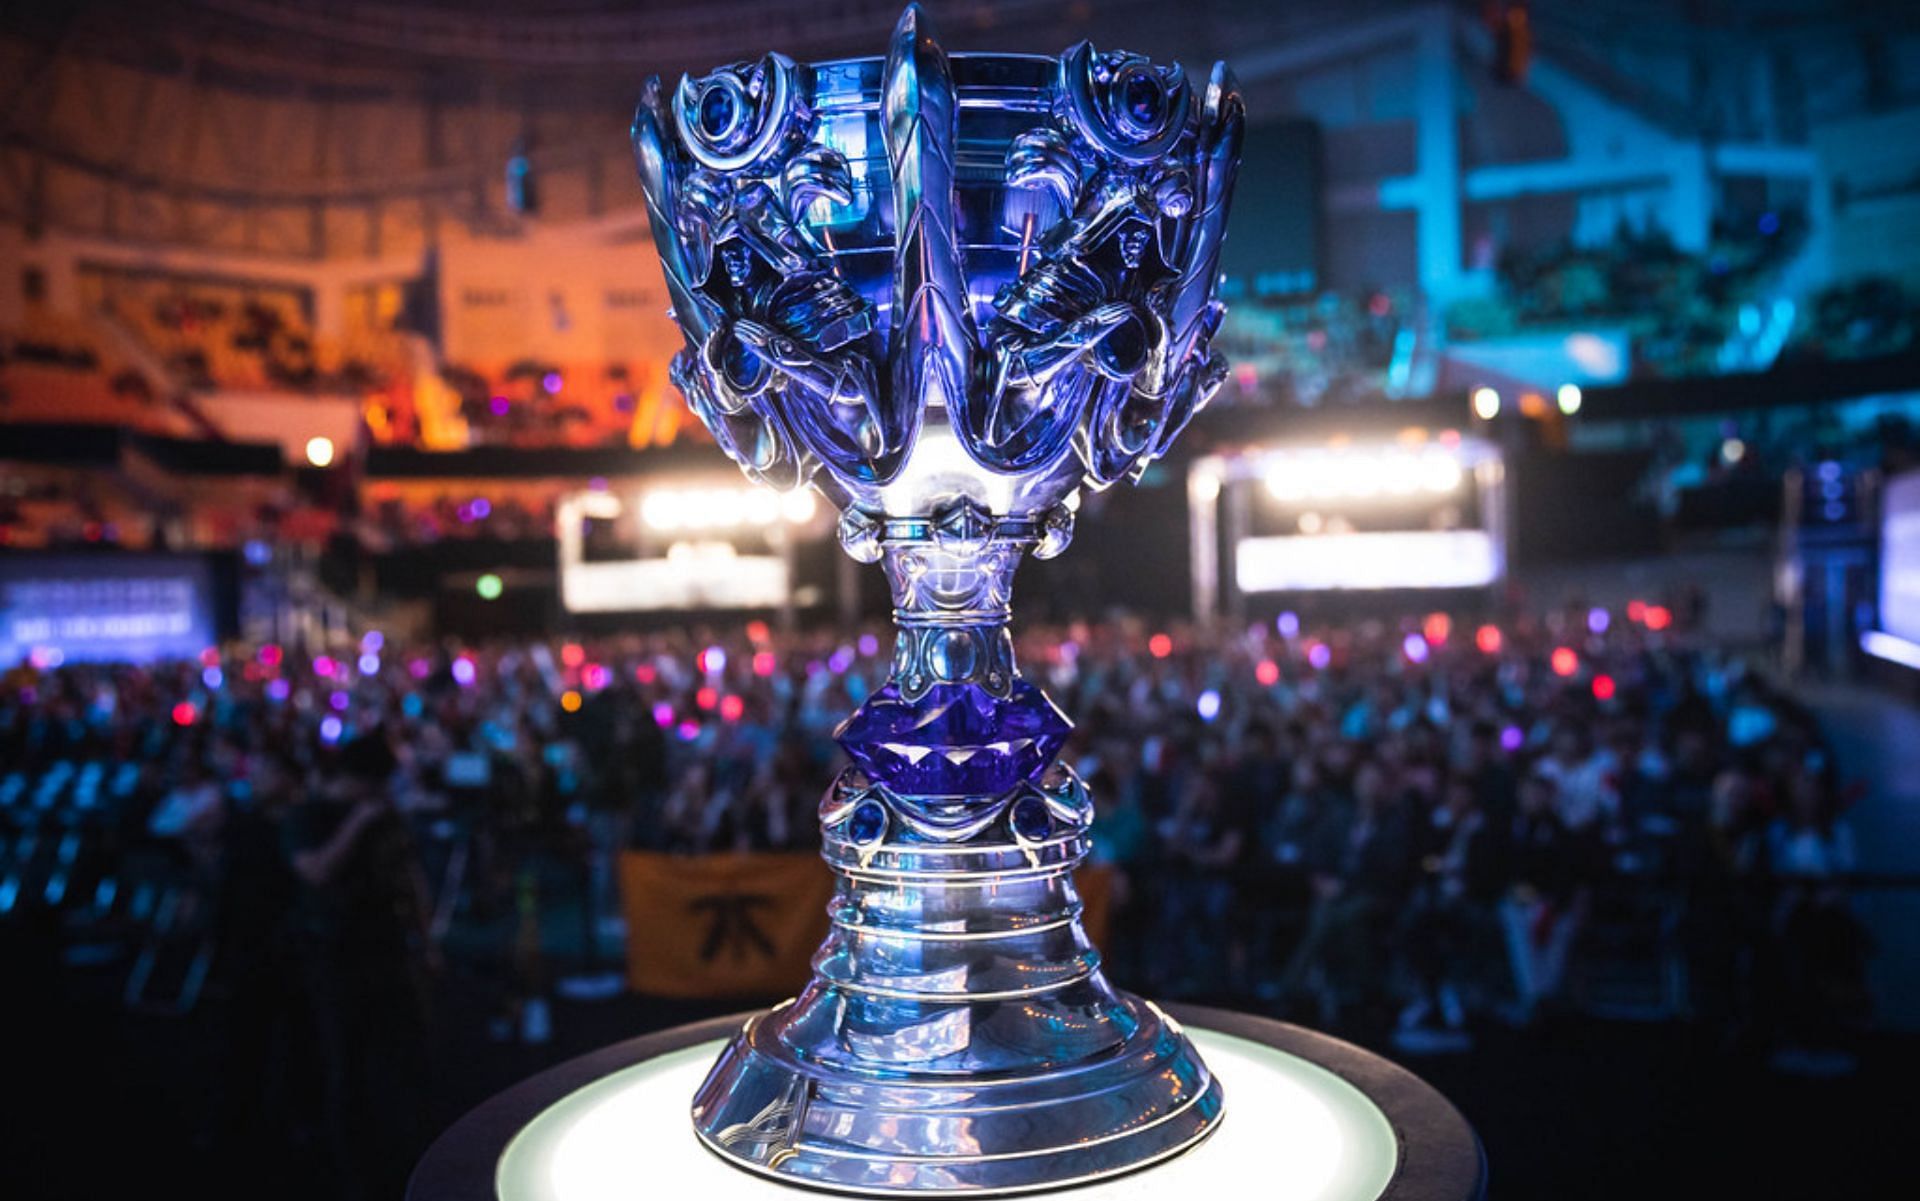 Tiffany & Co. Reveals Official 'League of Legends' World Championship Trophy